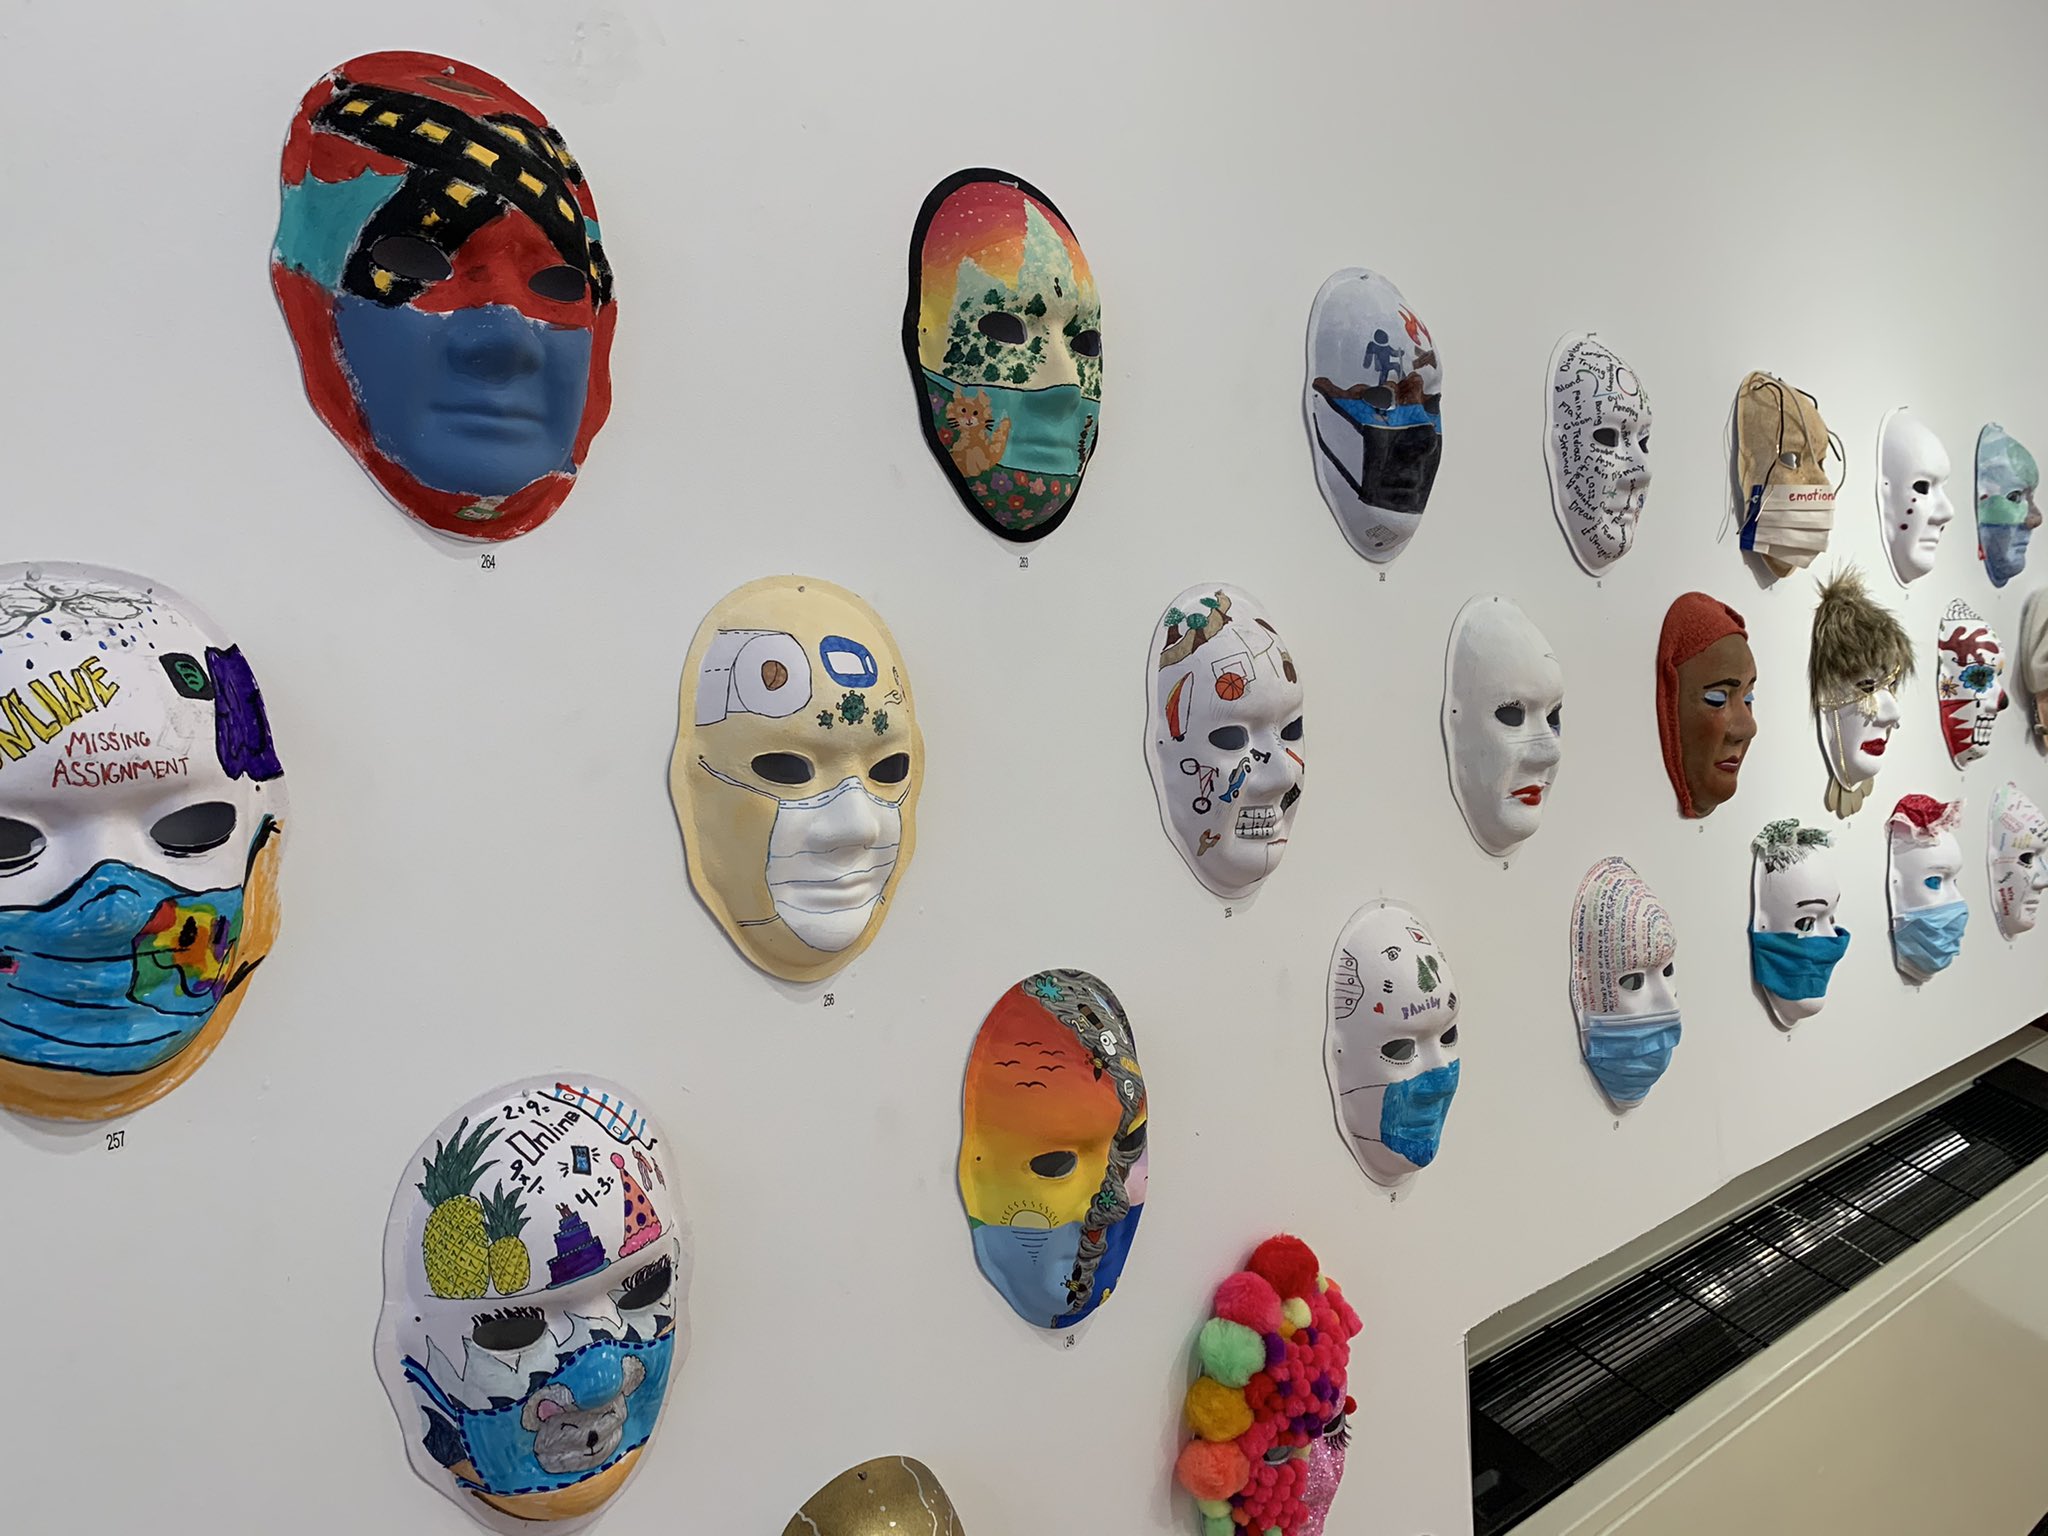 Over 400 Masks On Display in 'Stay Safe' Mask Exhibit in Manistee